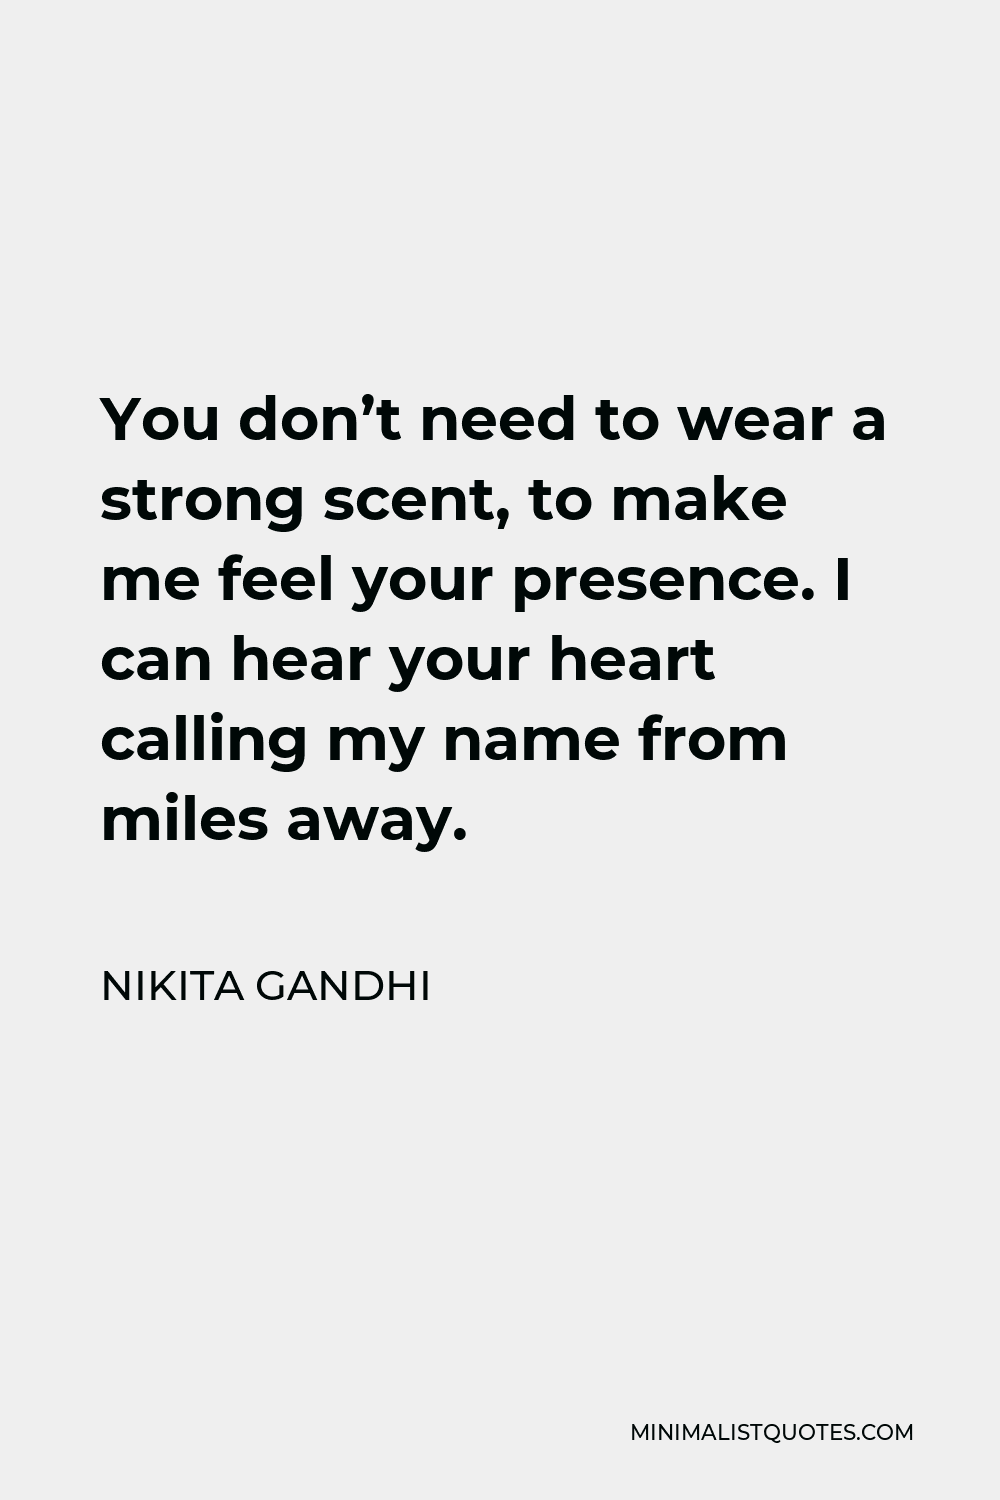 Nikita Gandhi Quote - You don’t need to wear a strong scent, to make me feel your presence. I can hear your heart calling my name from miles away.